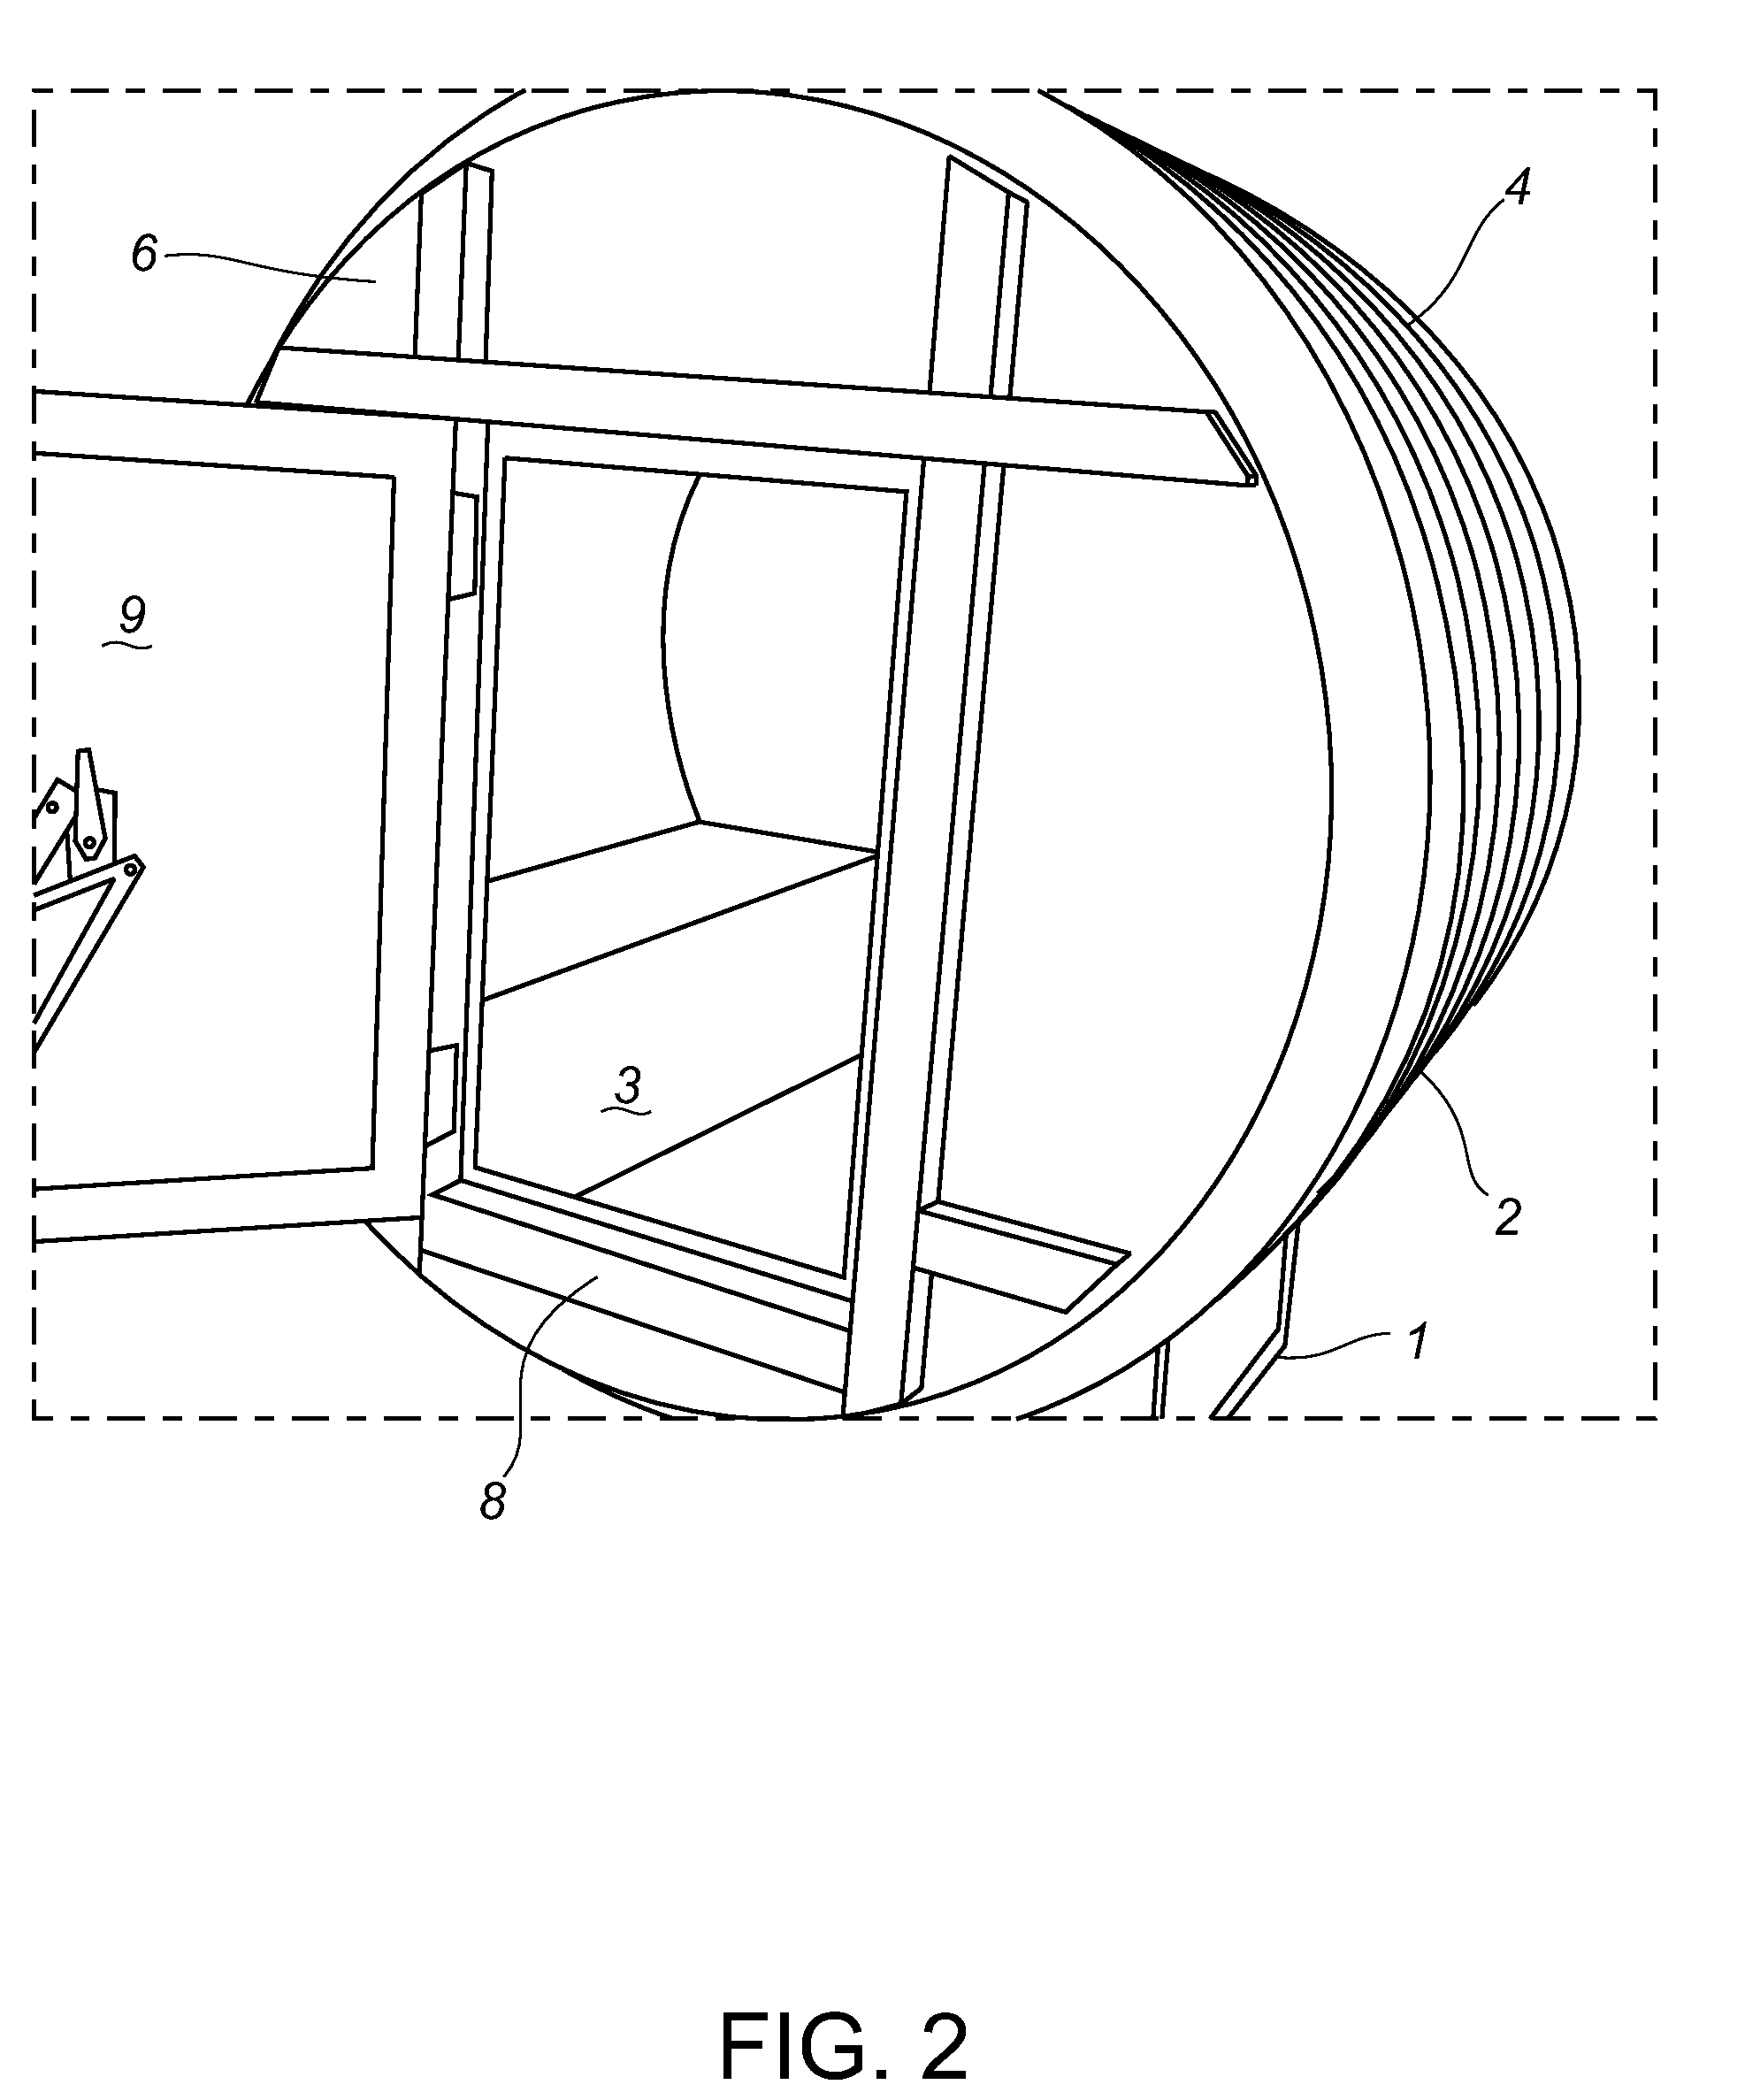 Self-contained shelter